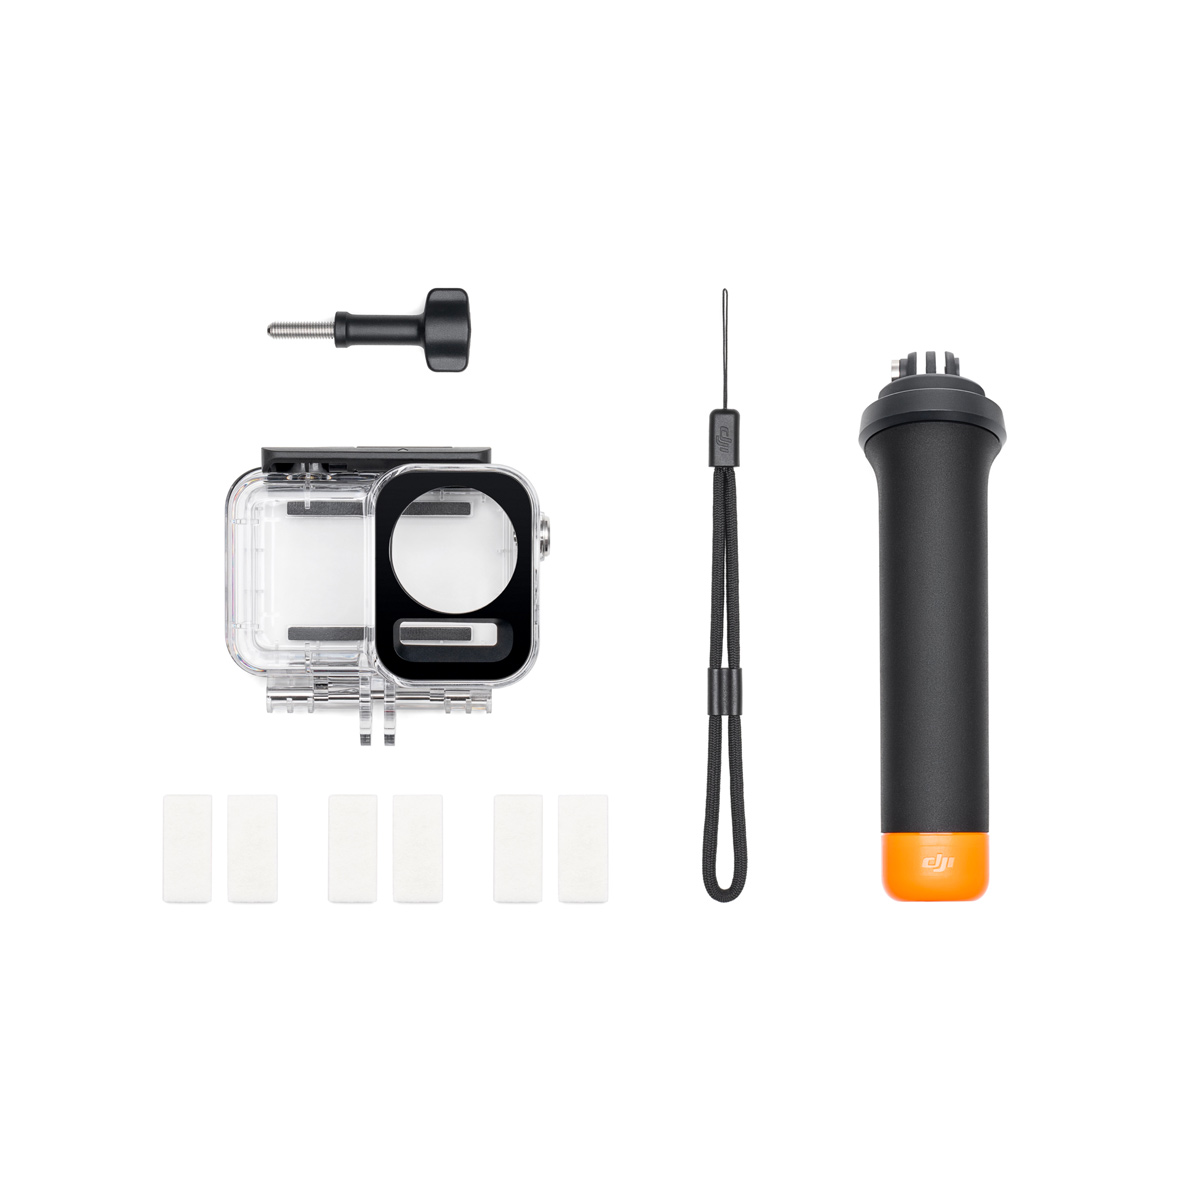 DJI Osmo Action Diving Accessory Kit